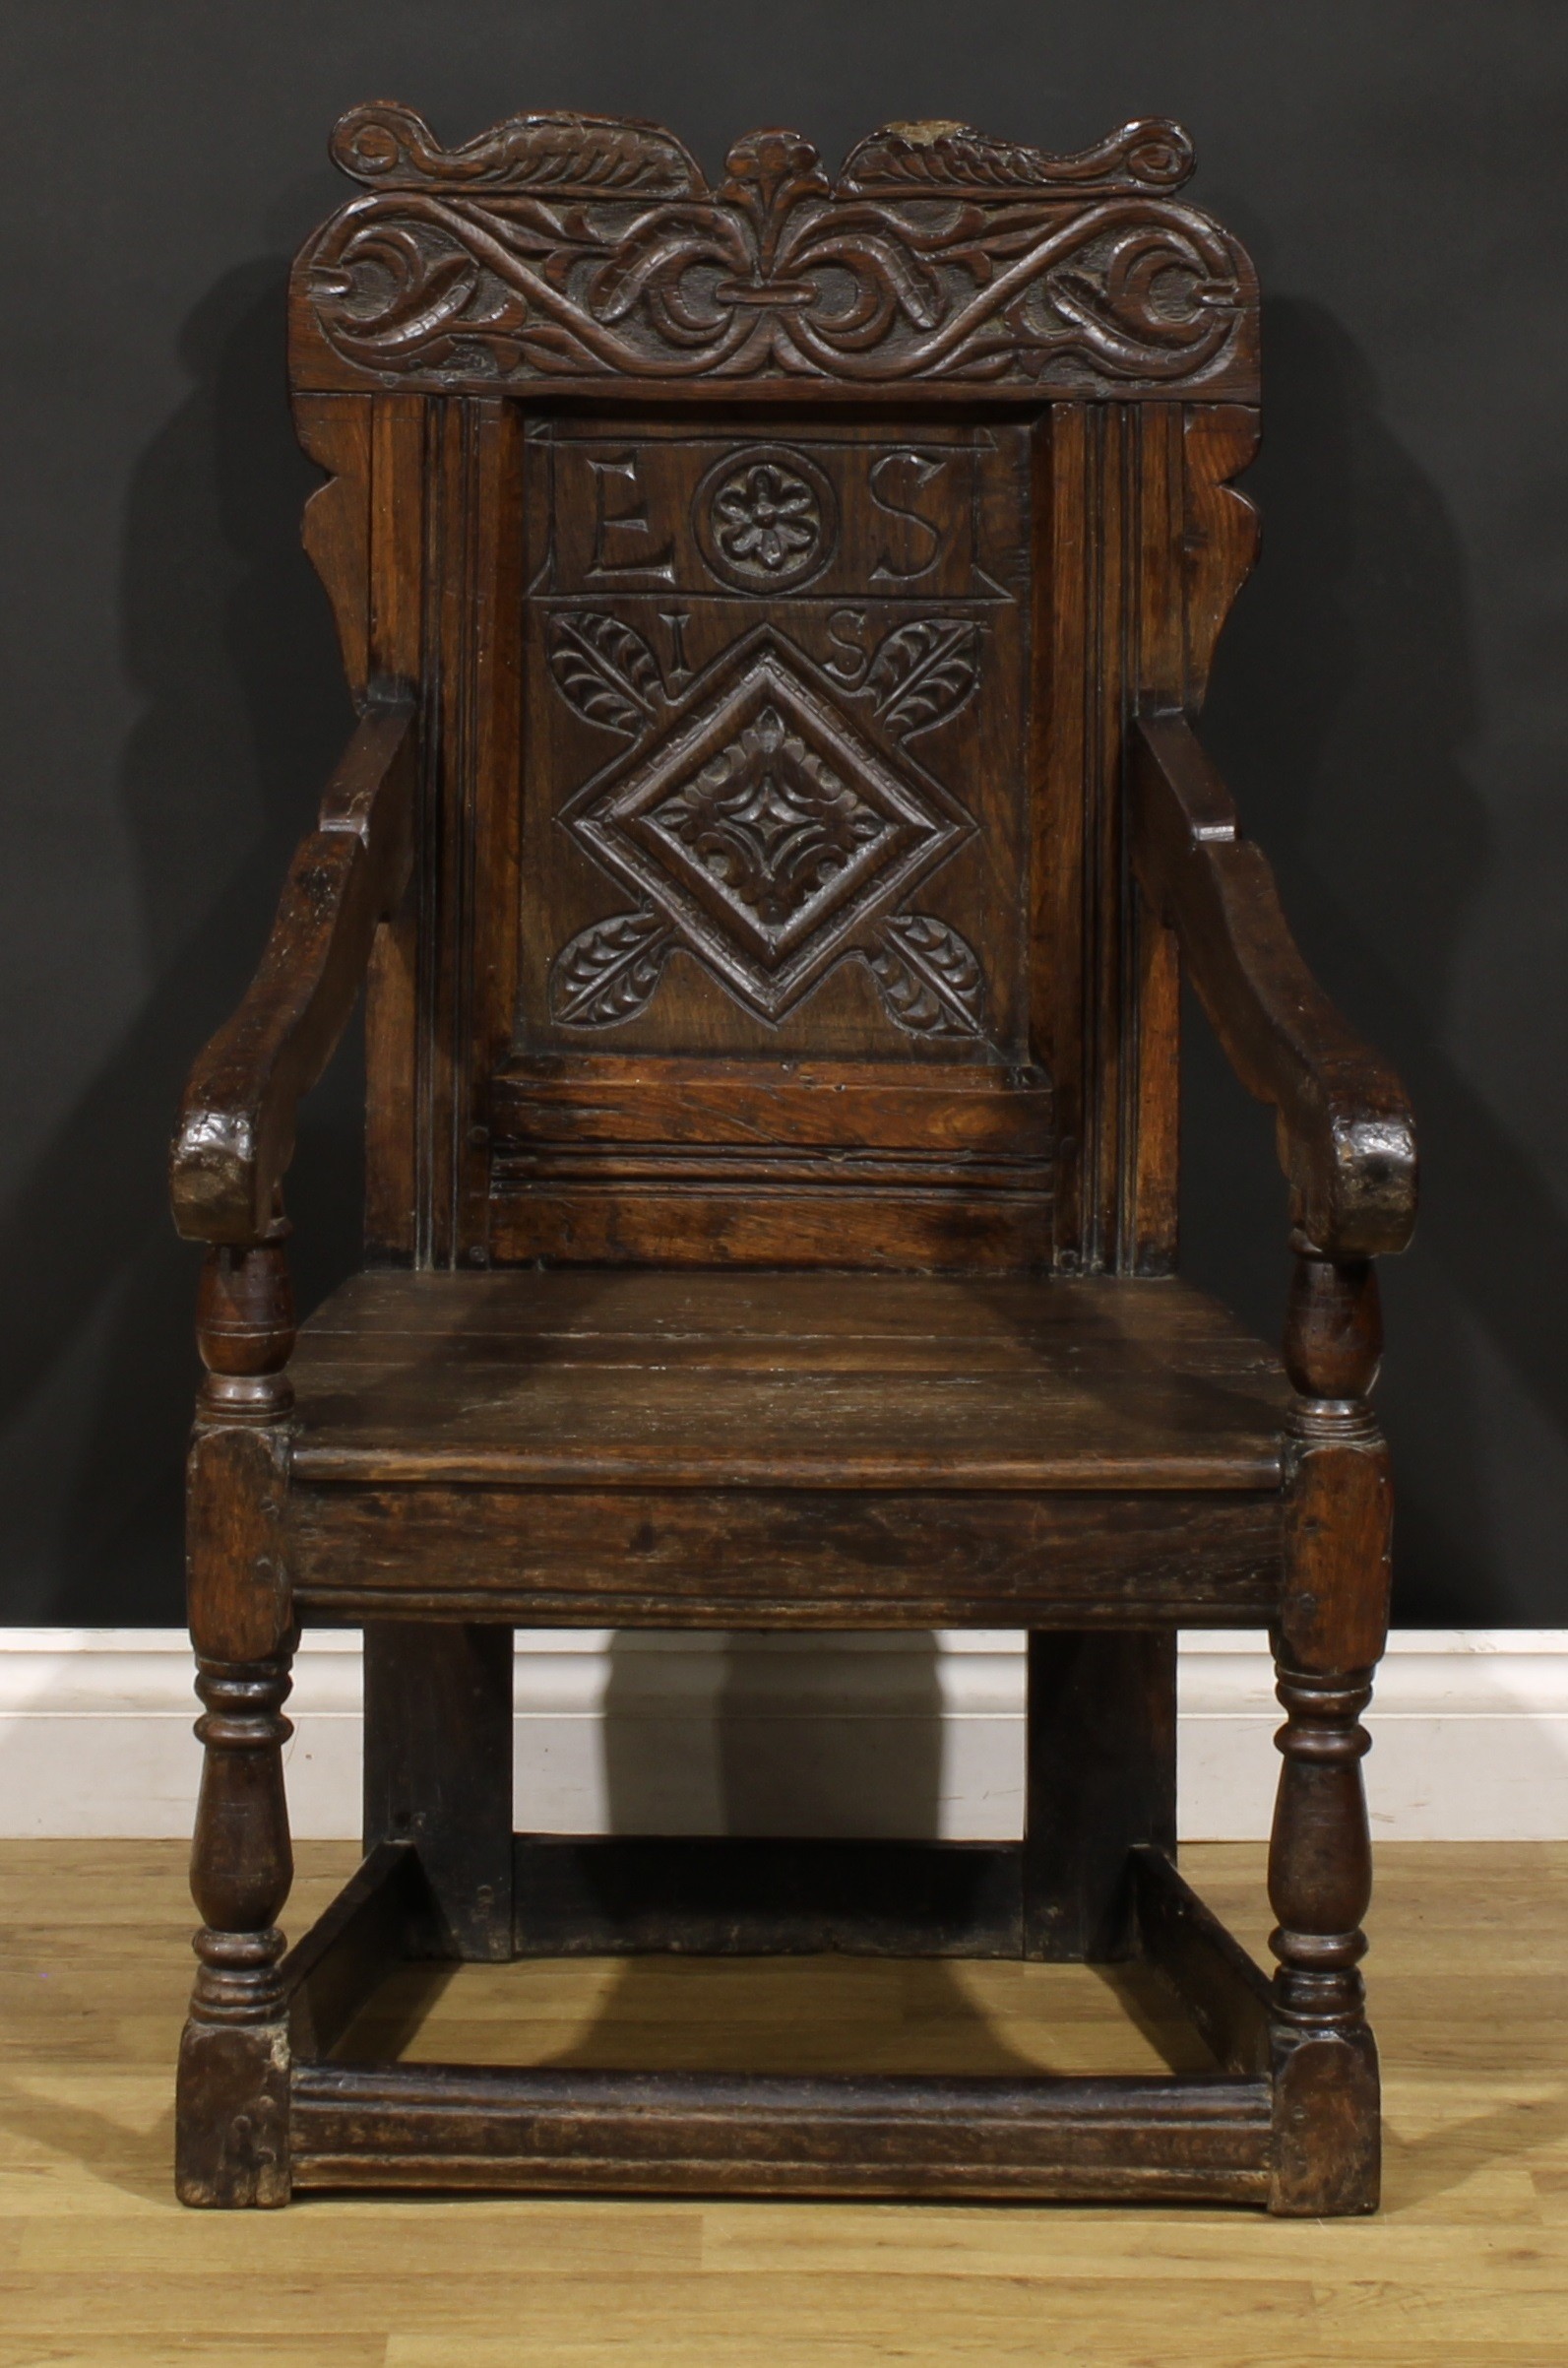 A 17th century oak wainscot armchair, shaped cresting carved with scrolling leafy branches, the